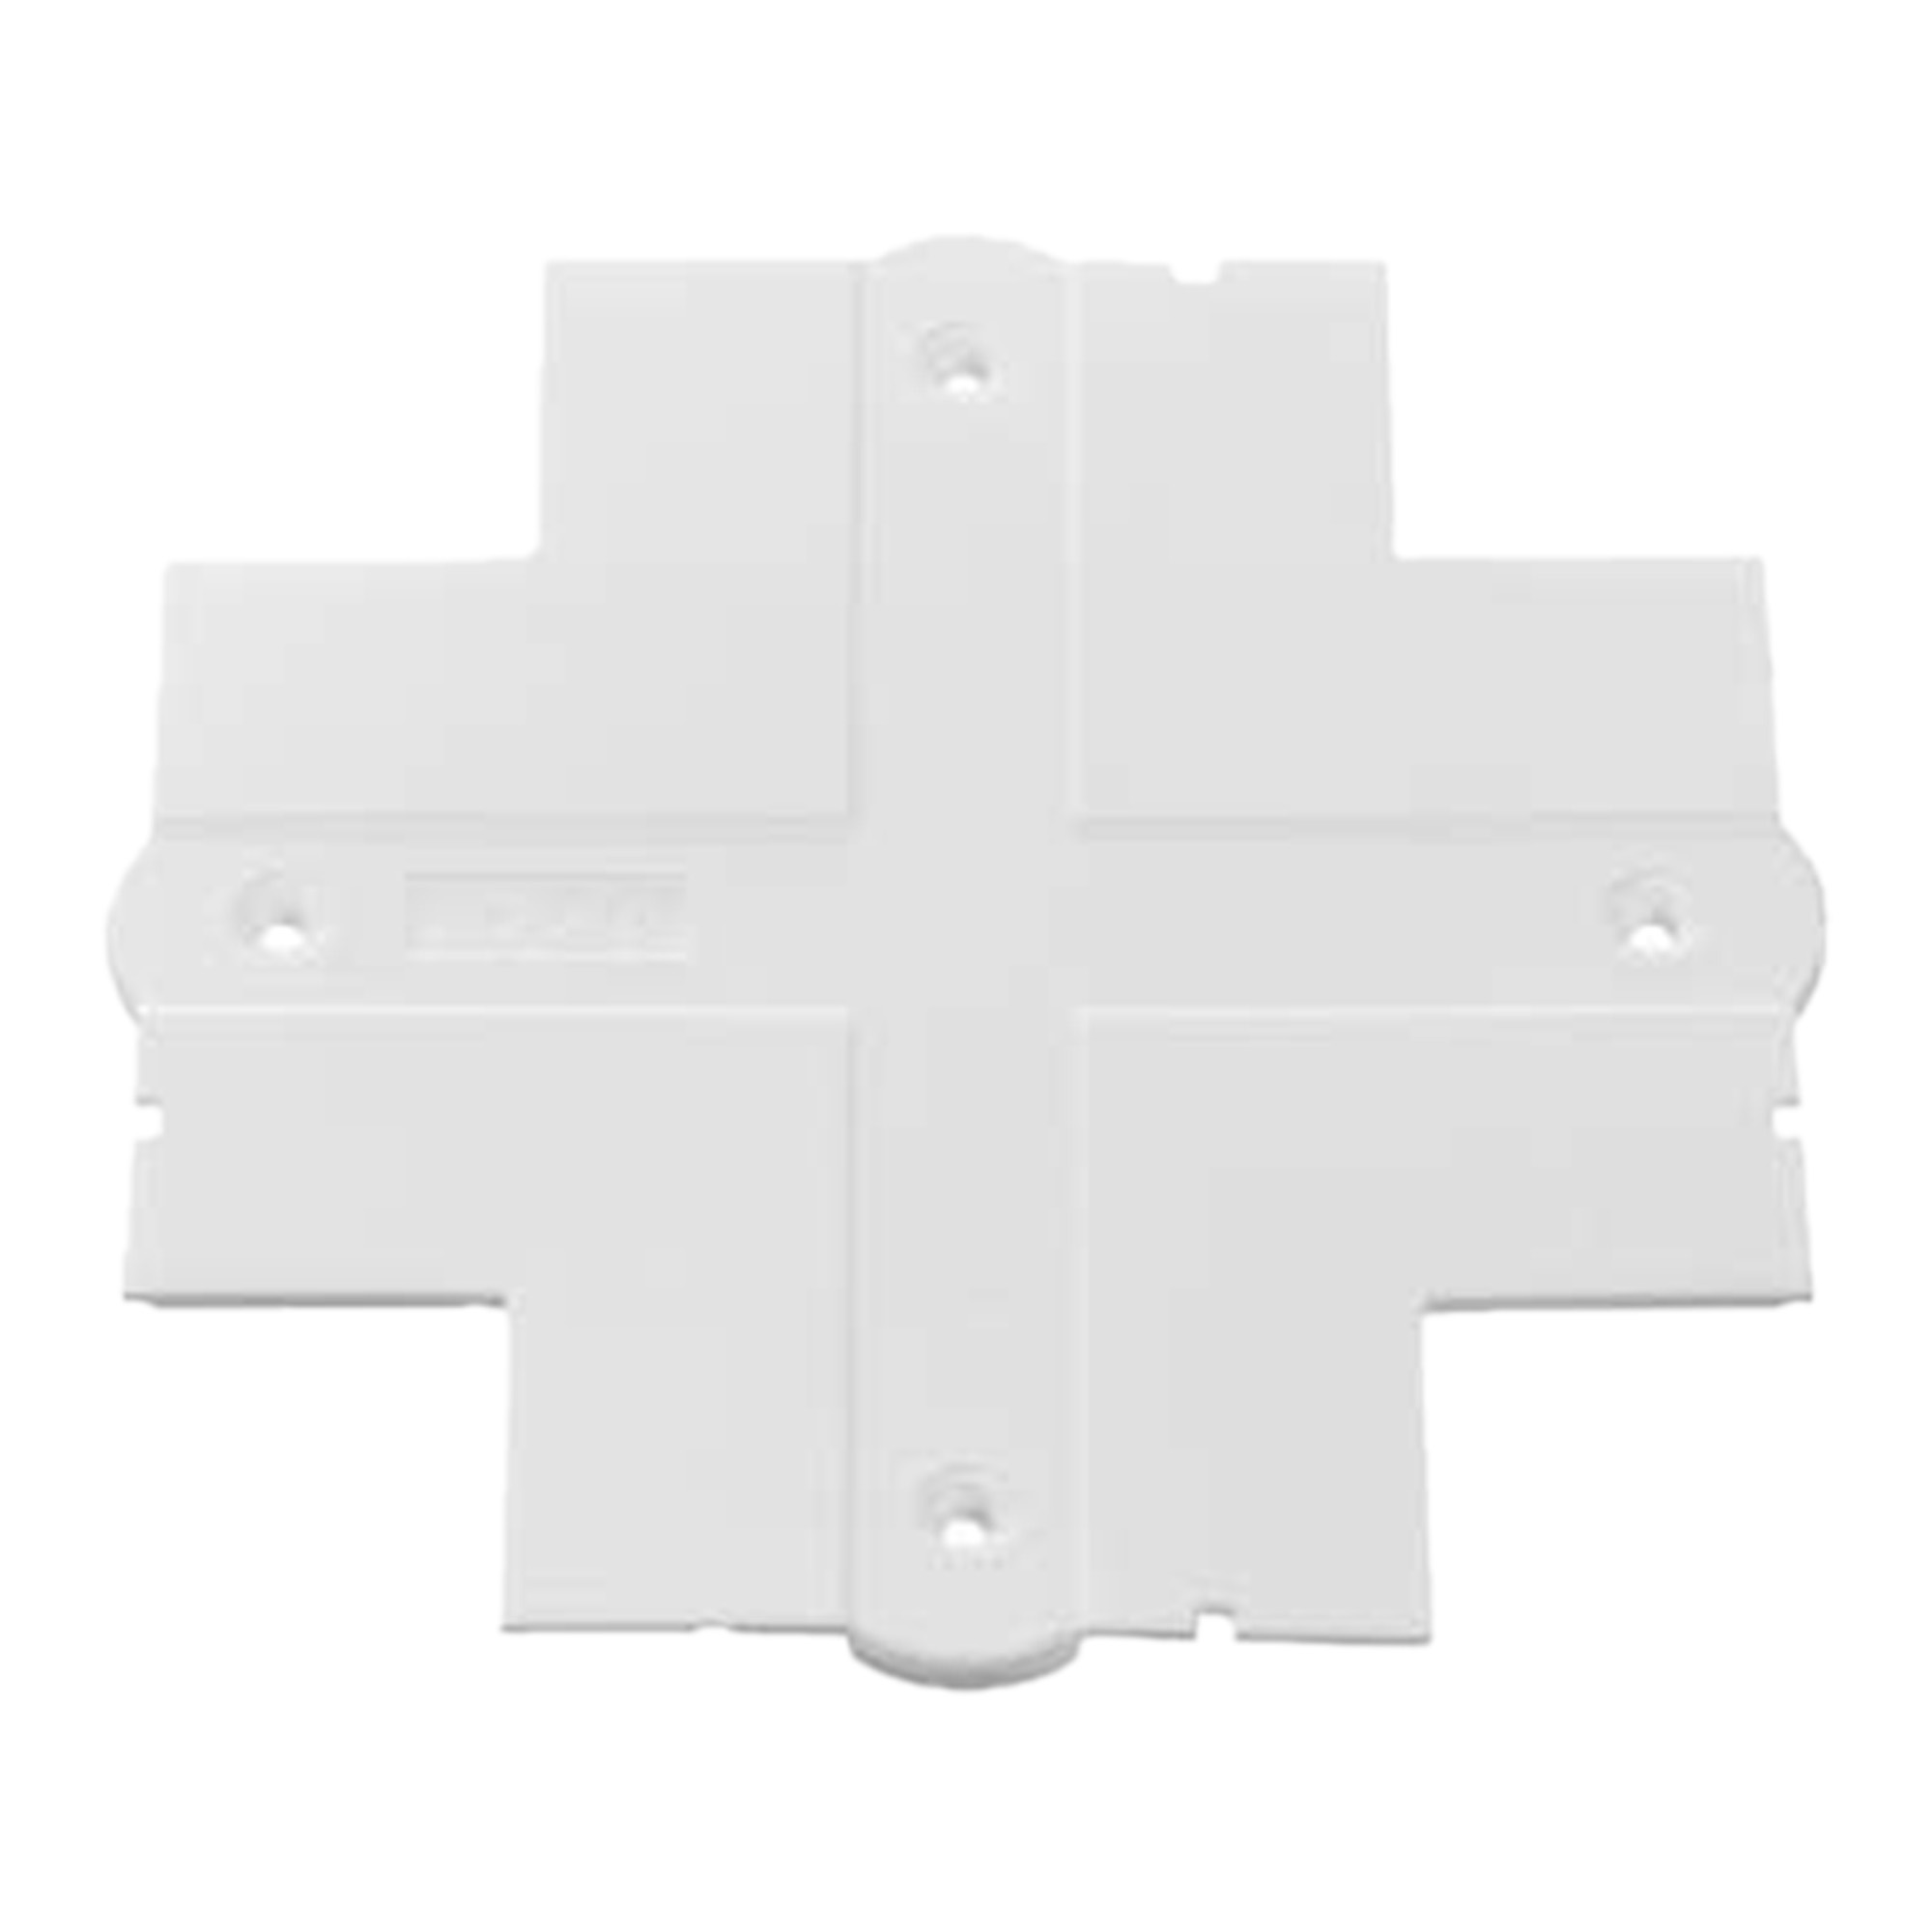 XTSF303  Triphasic Track Cover Plate For  XTS343/XTS353 White